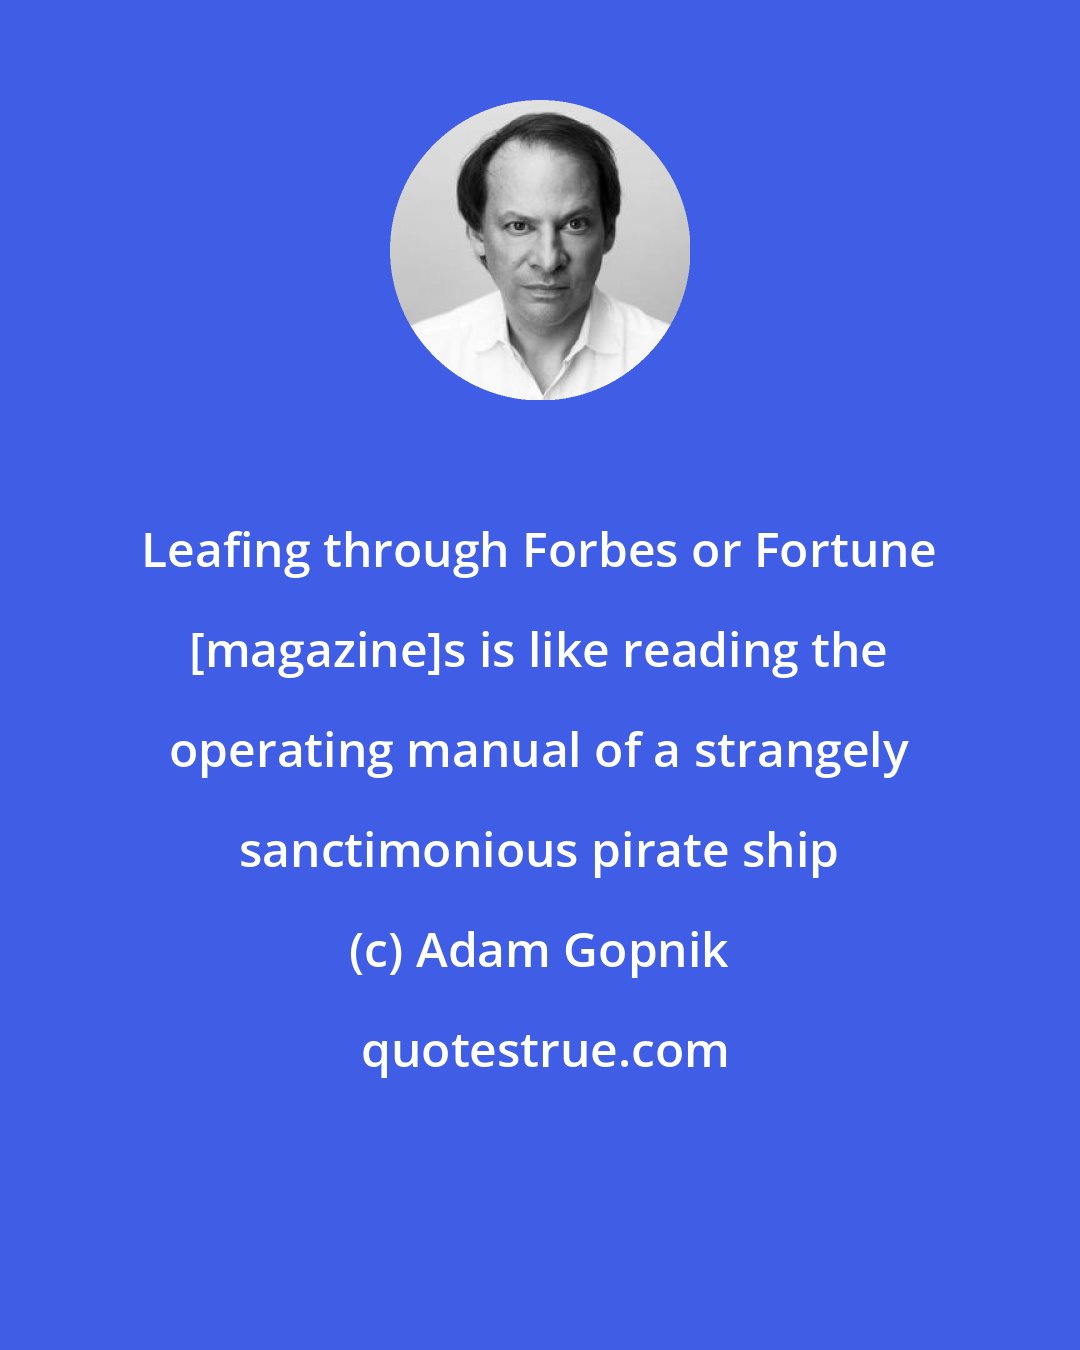 Adam Gopnik: Leafing through Forbes or Fortune [magazine]s is like reading the operating manual of a strangely sanctimonious pirate ship